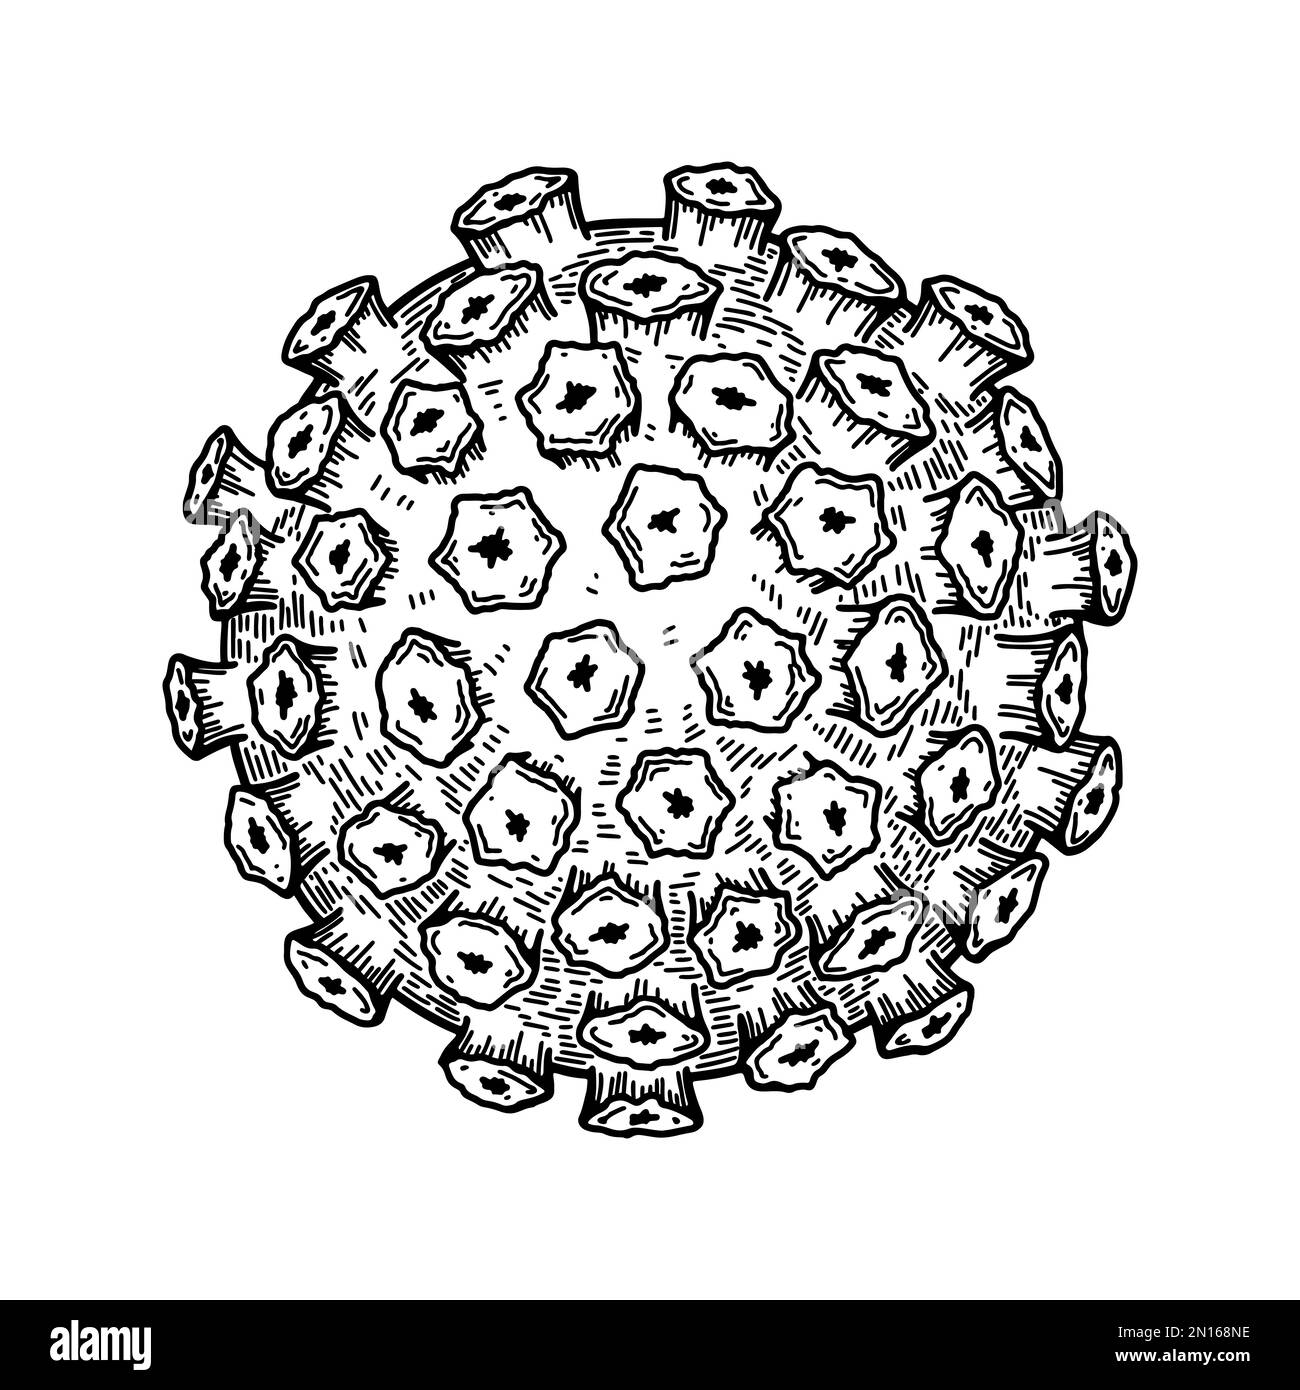 Papillomavirus isolated on white background. Hand drawn realistic detailed scientifical vector illustration in sketch style Stock Vector